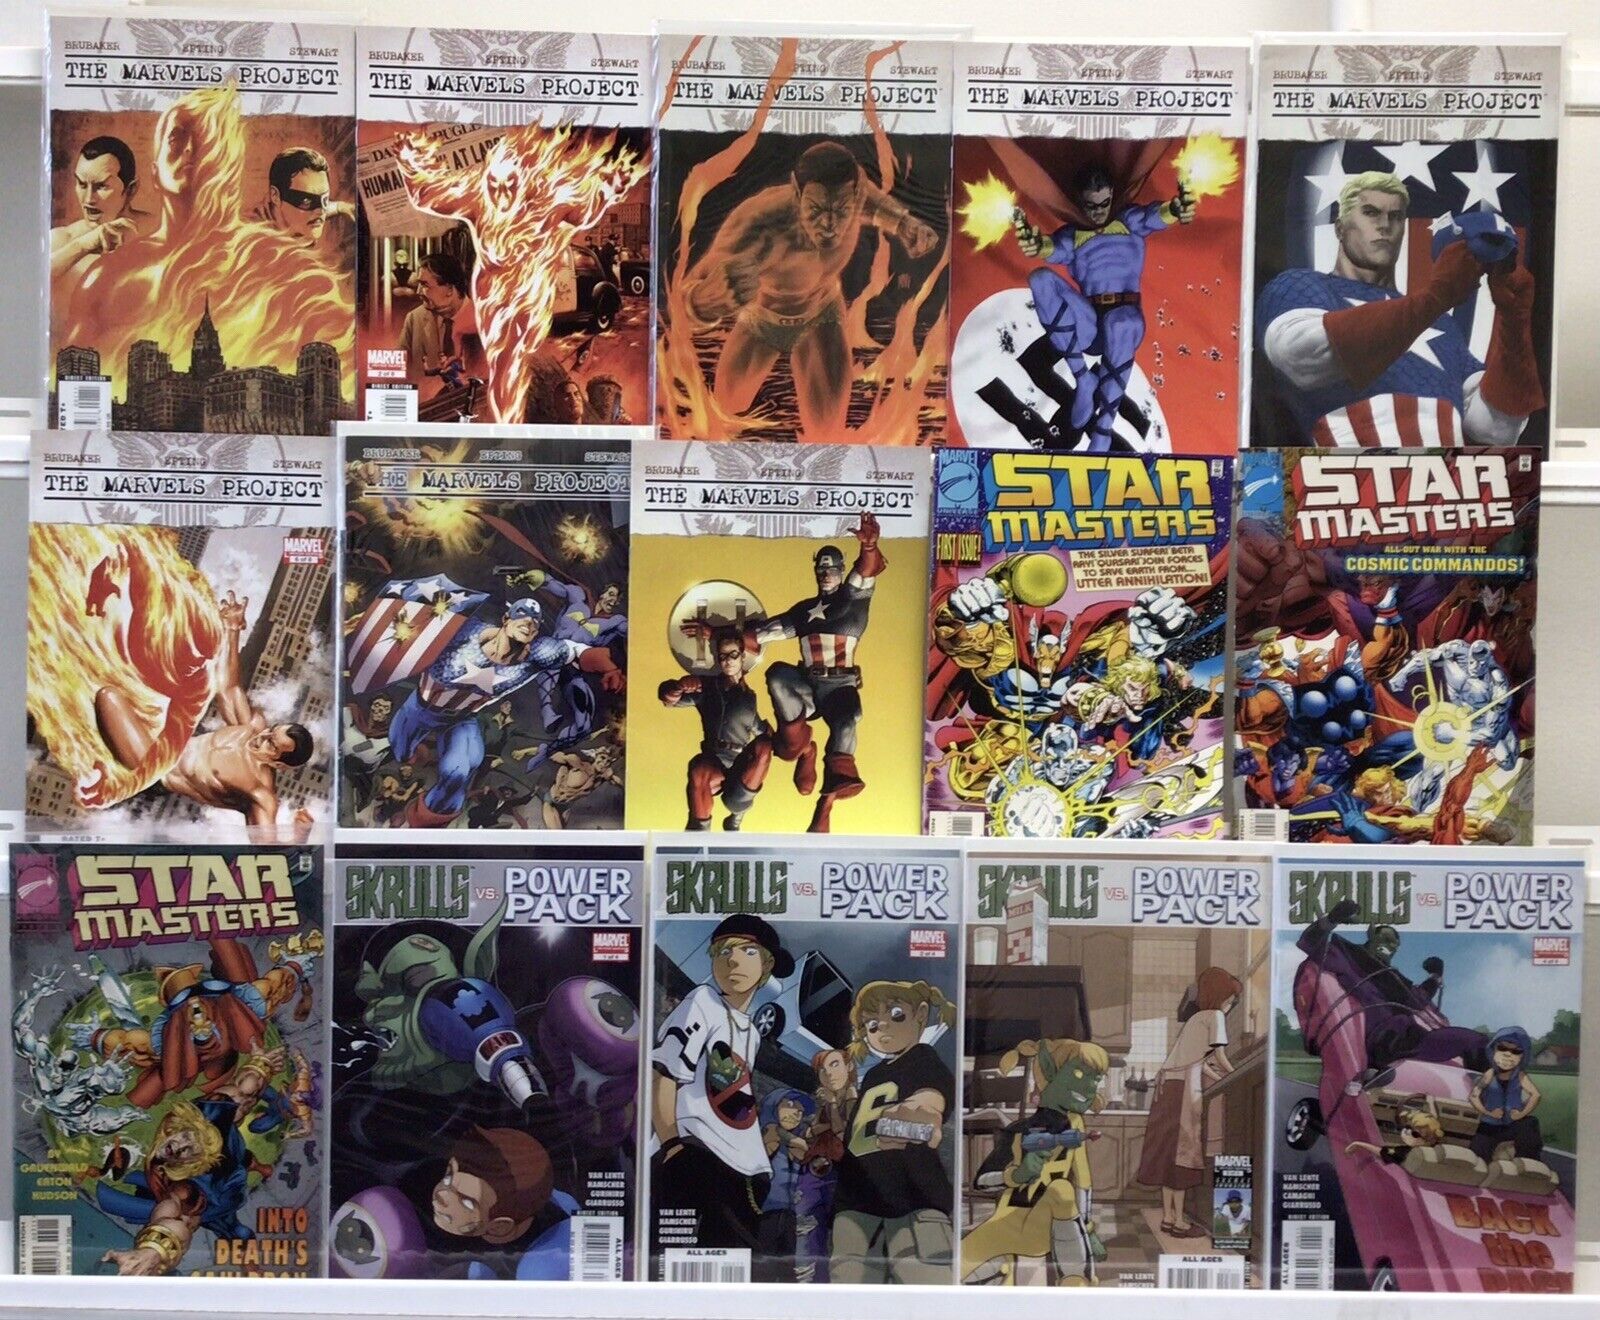 Marvel Comics - The Marvels Projects, Star Masters & Skrulls vs Power Pack 